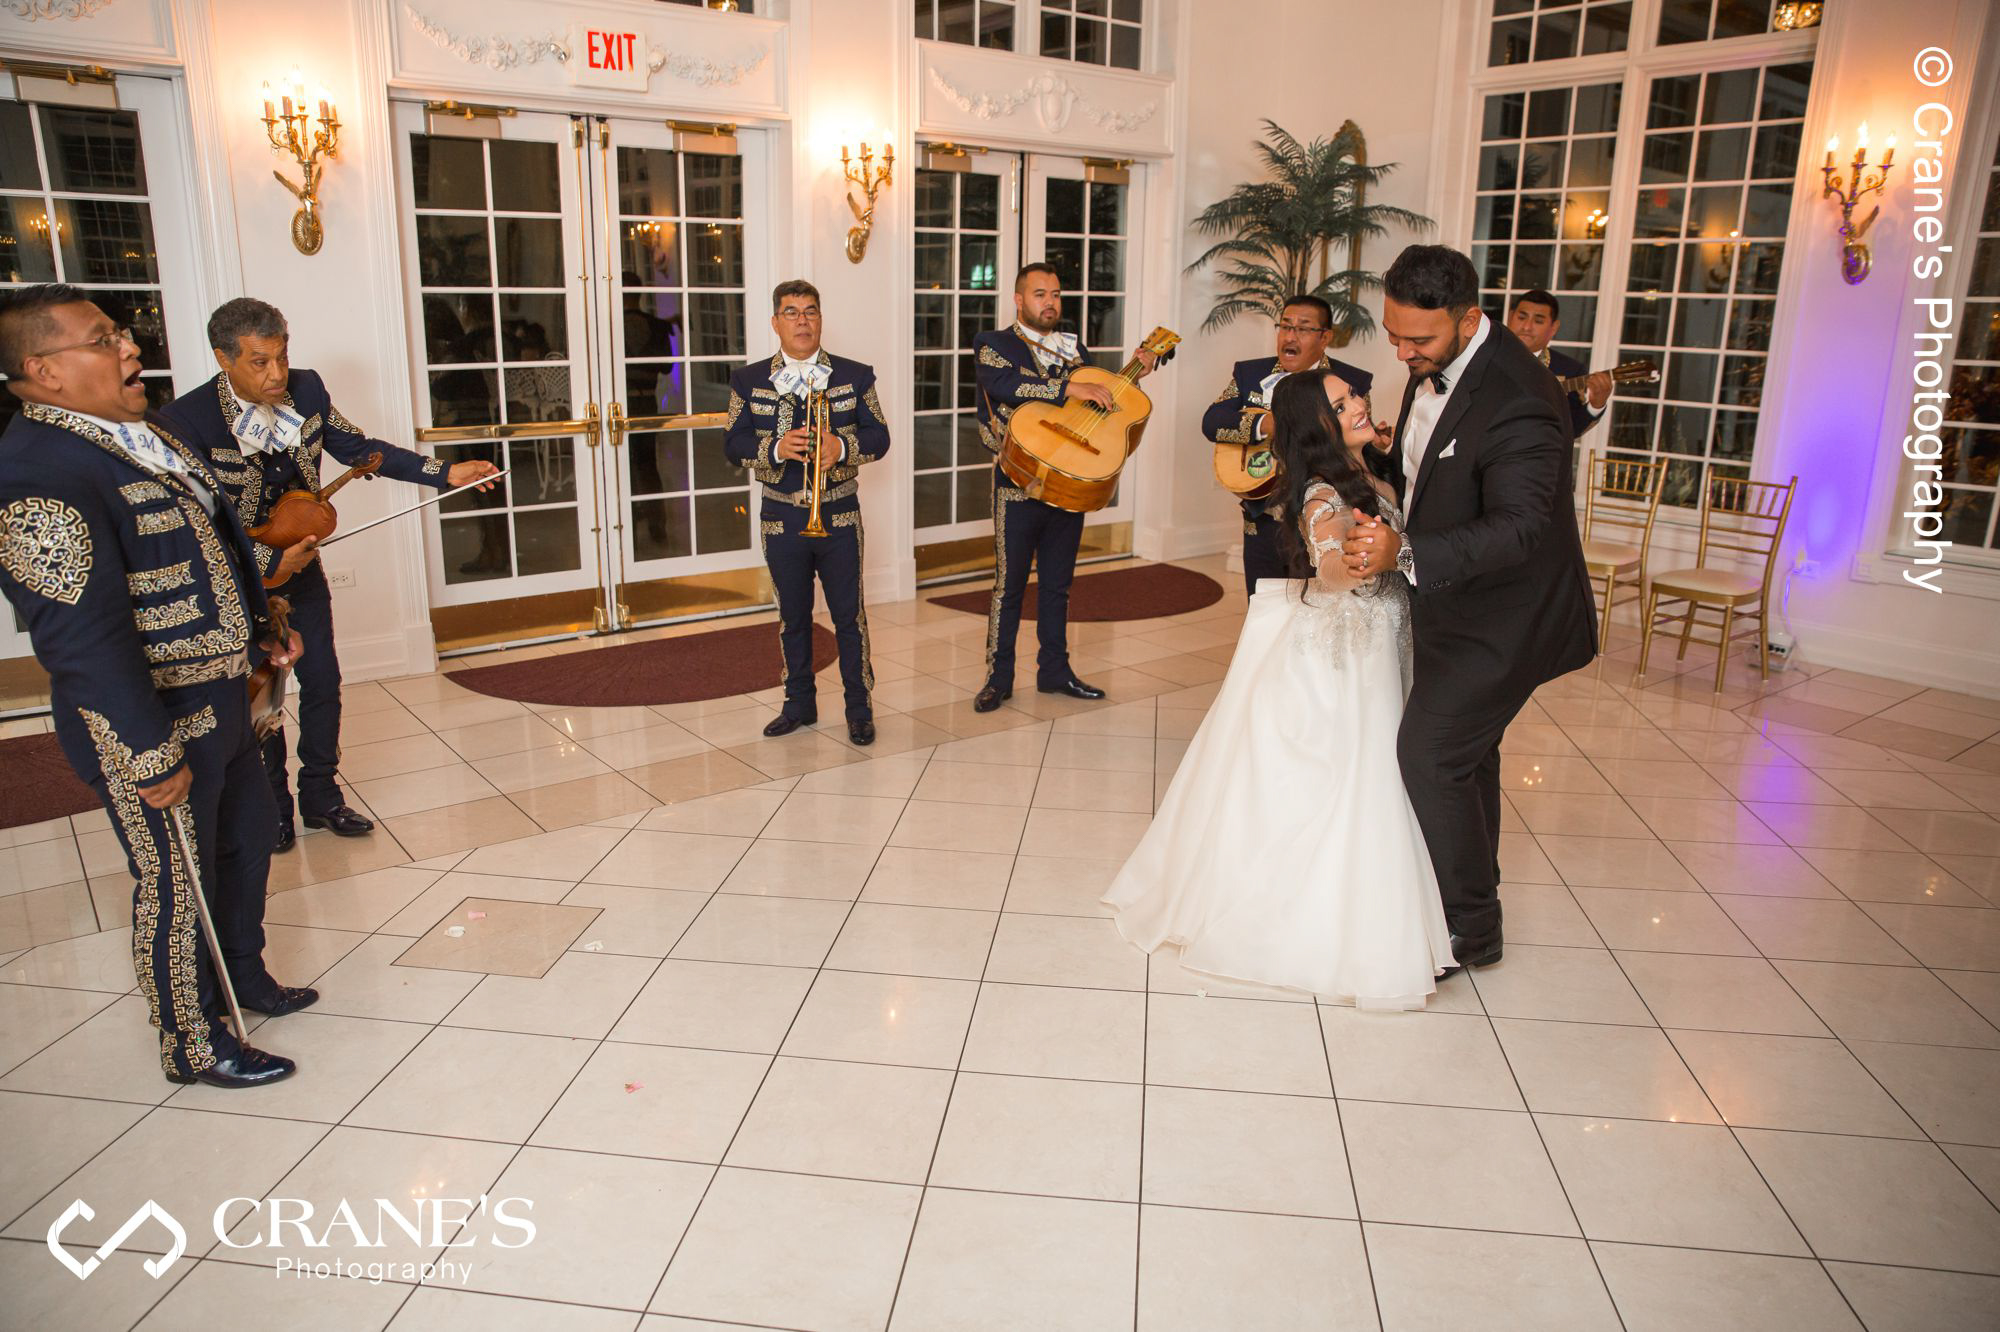 Bride and groom dance in front of a mariachi band at the sophisticated ballroom at the Haley Mansion